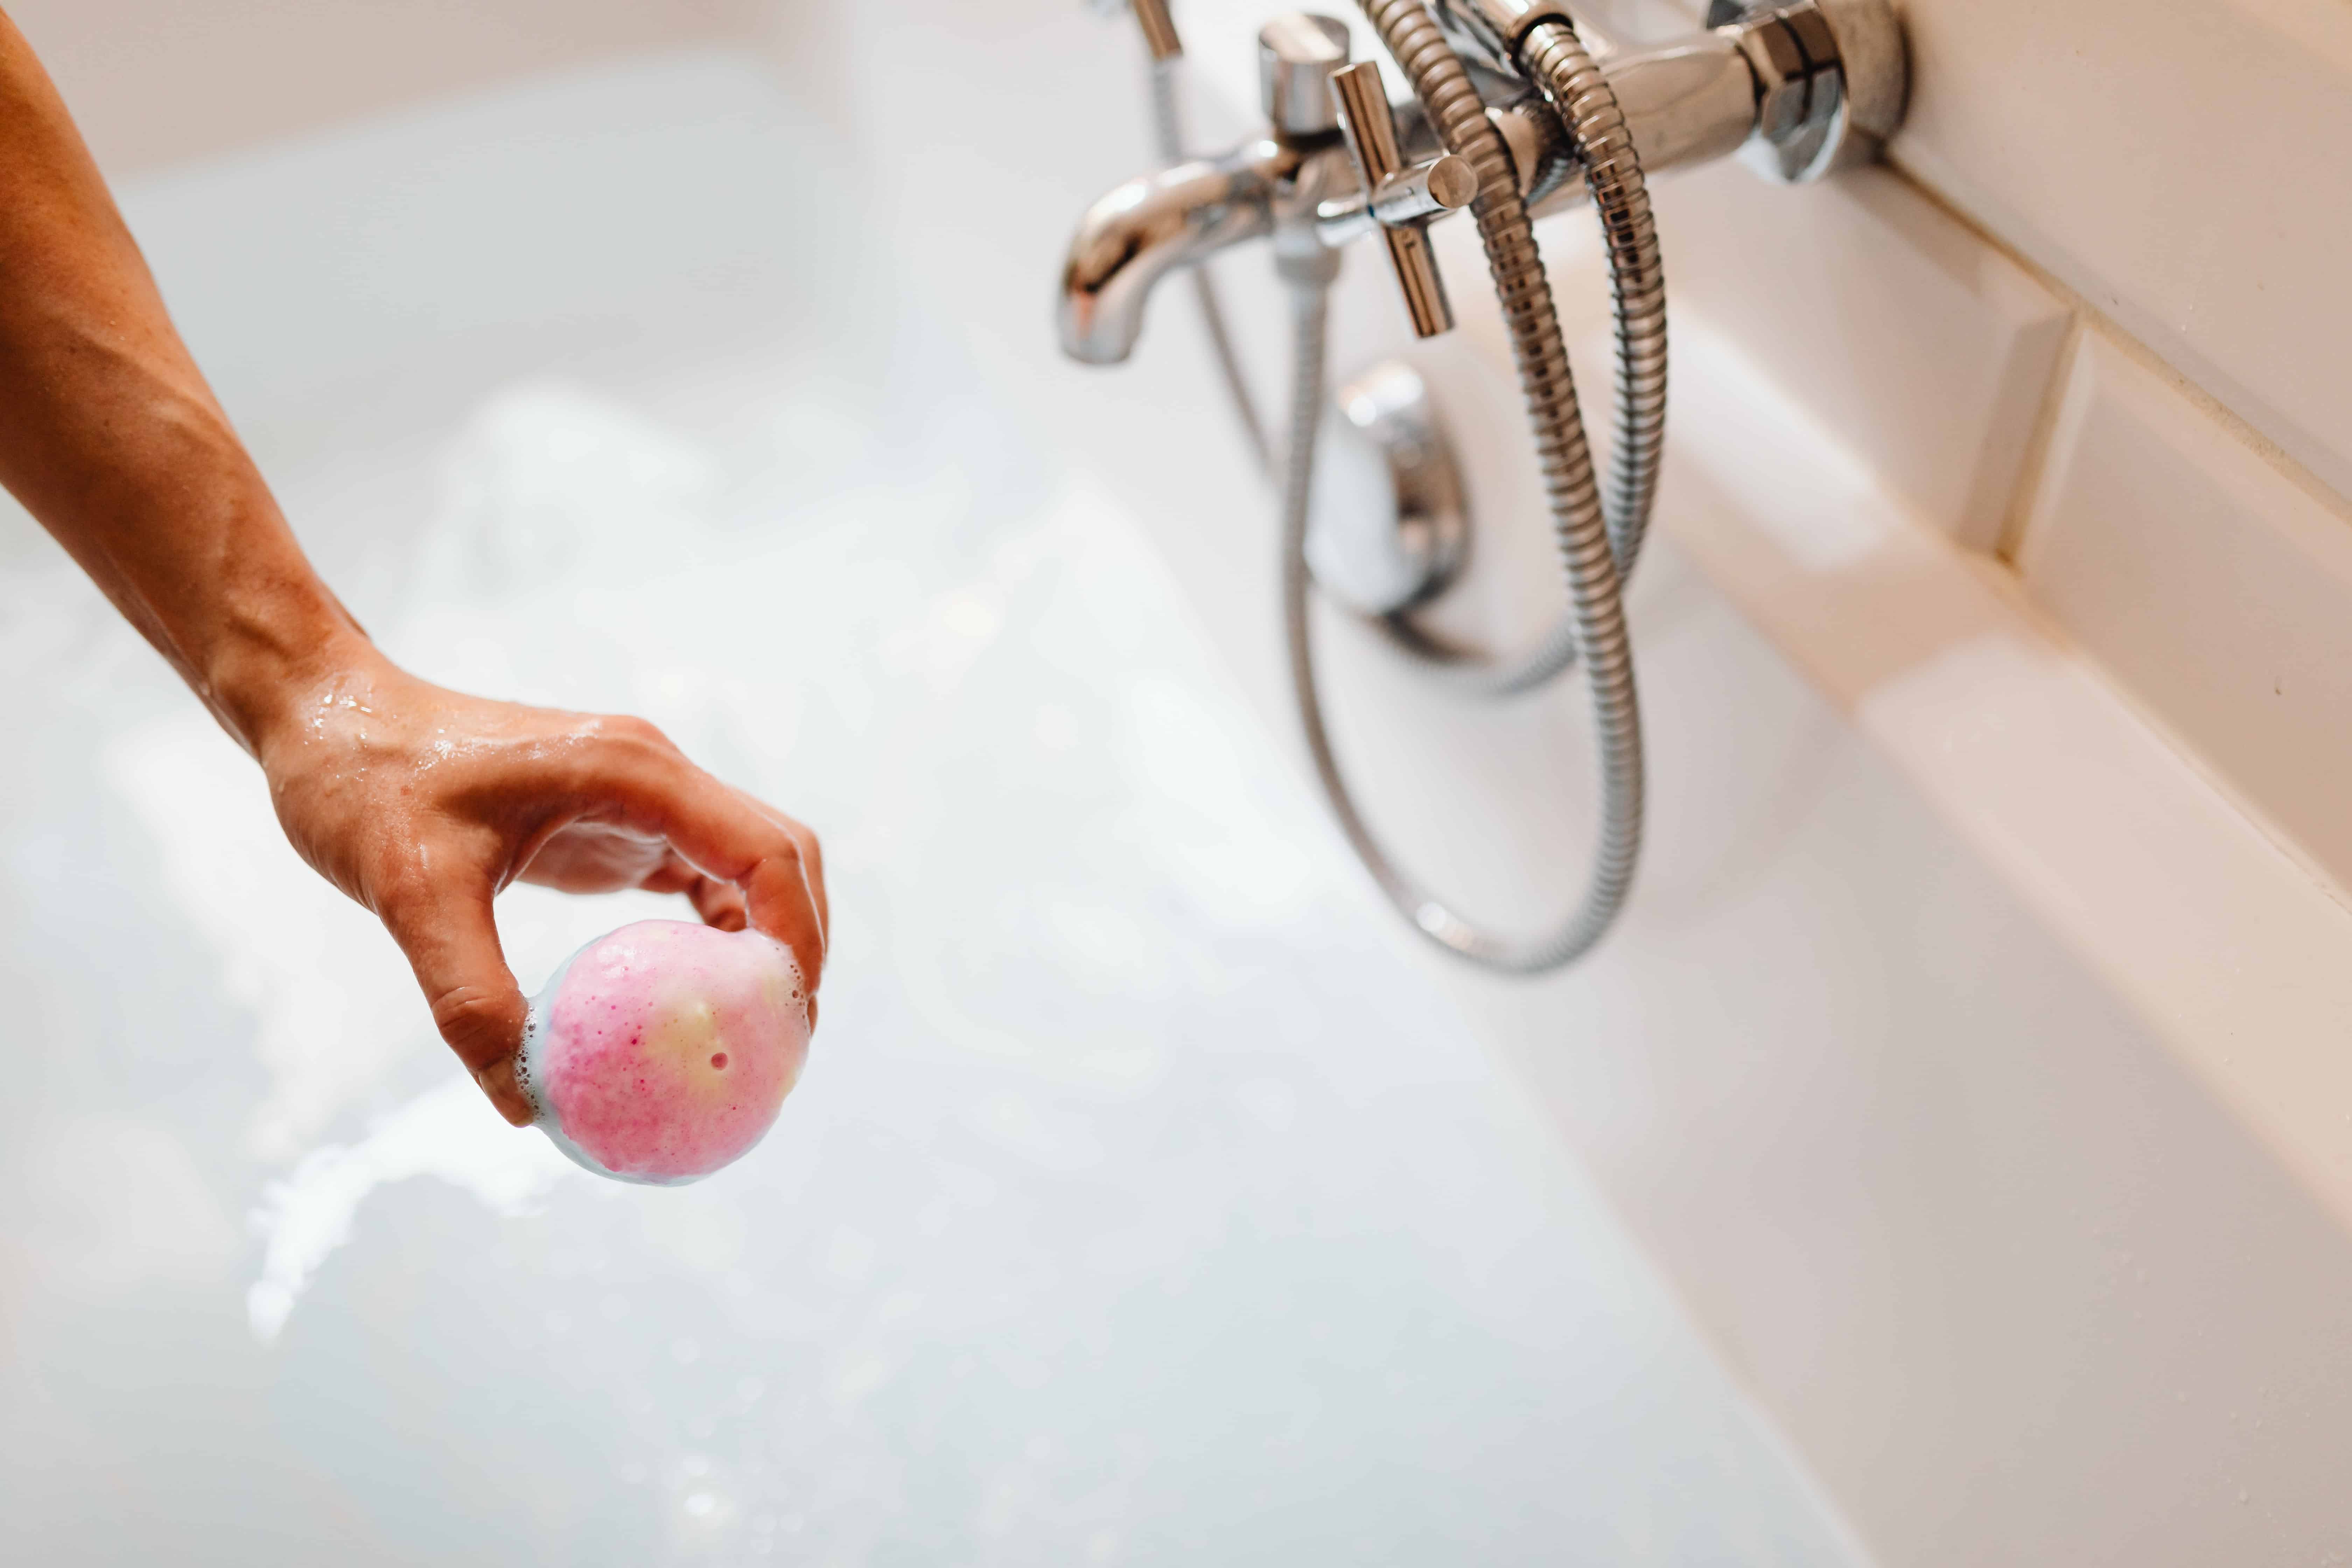 The Best Kris Kringle Gift Ideas for Every Budget: Bath Bomb